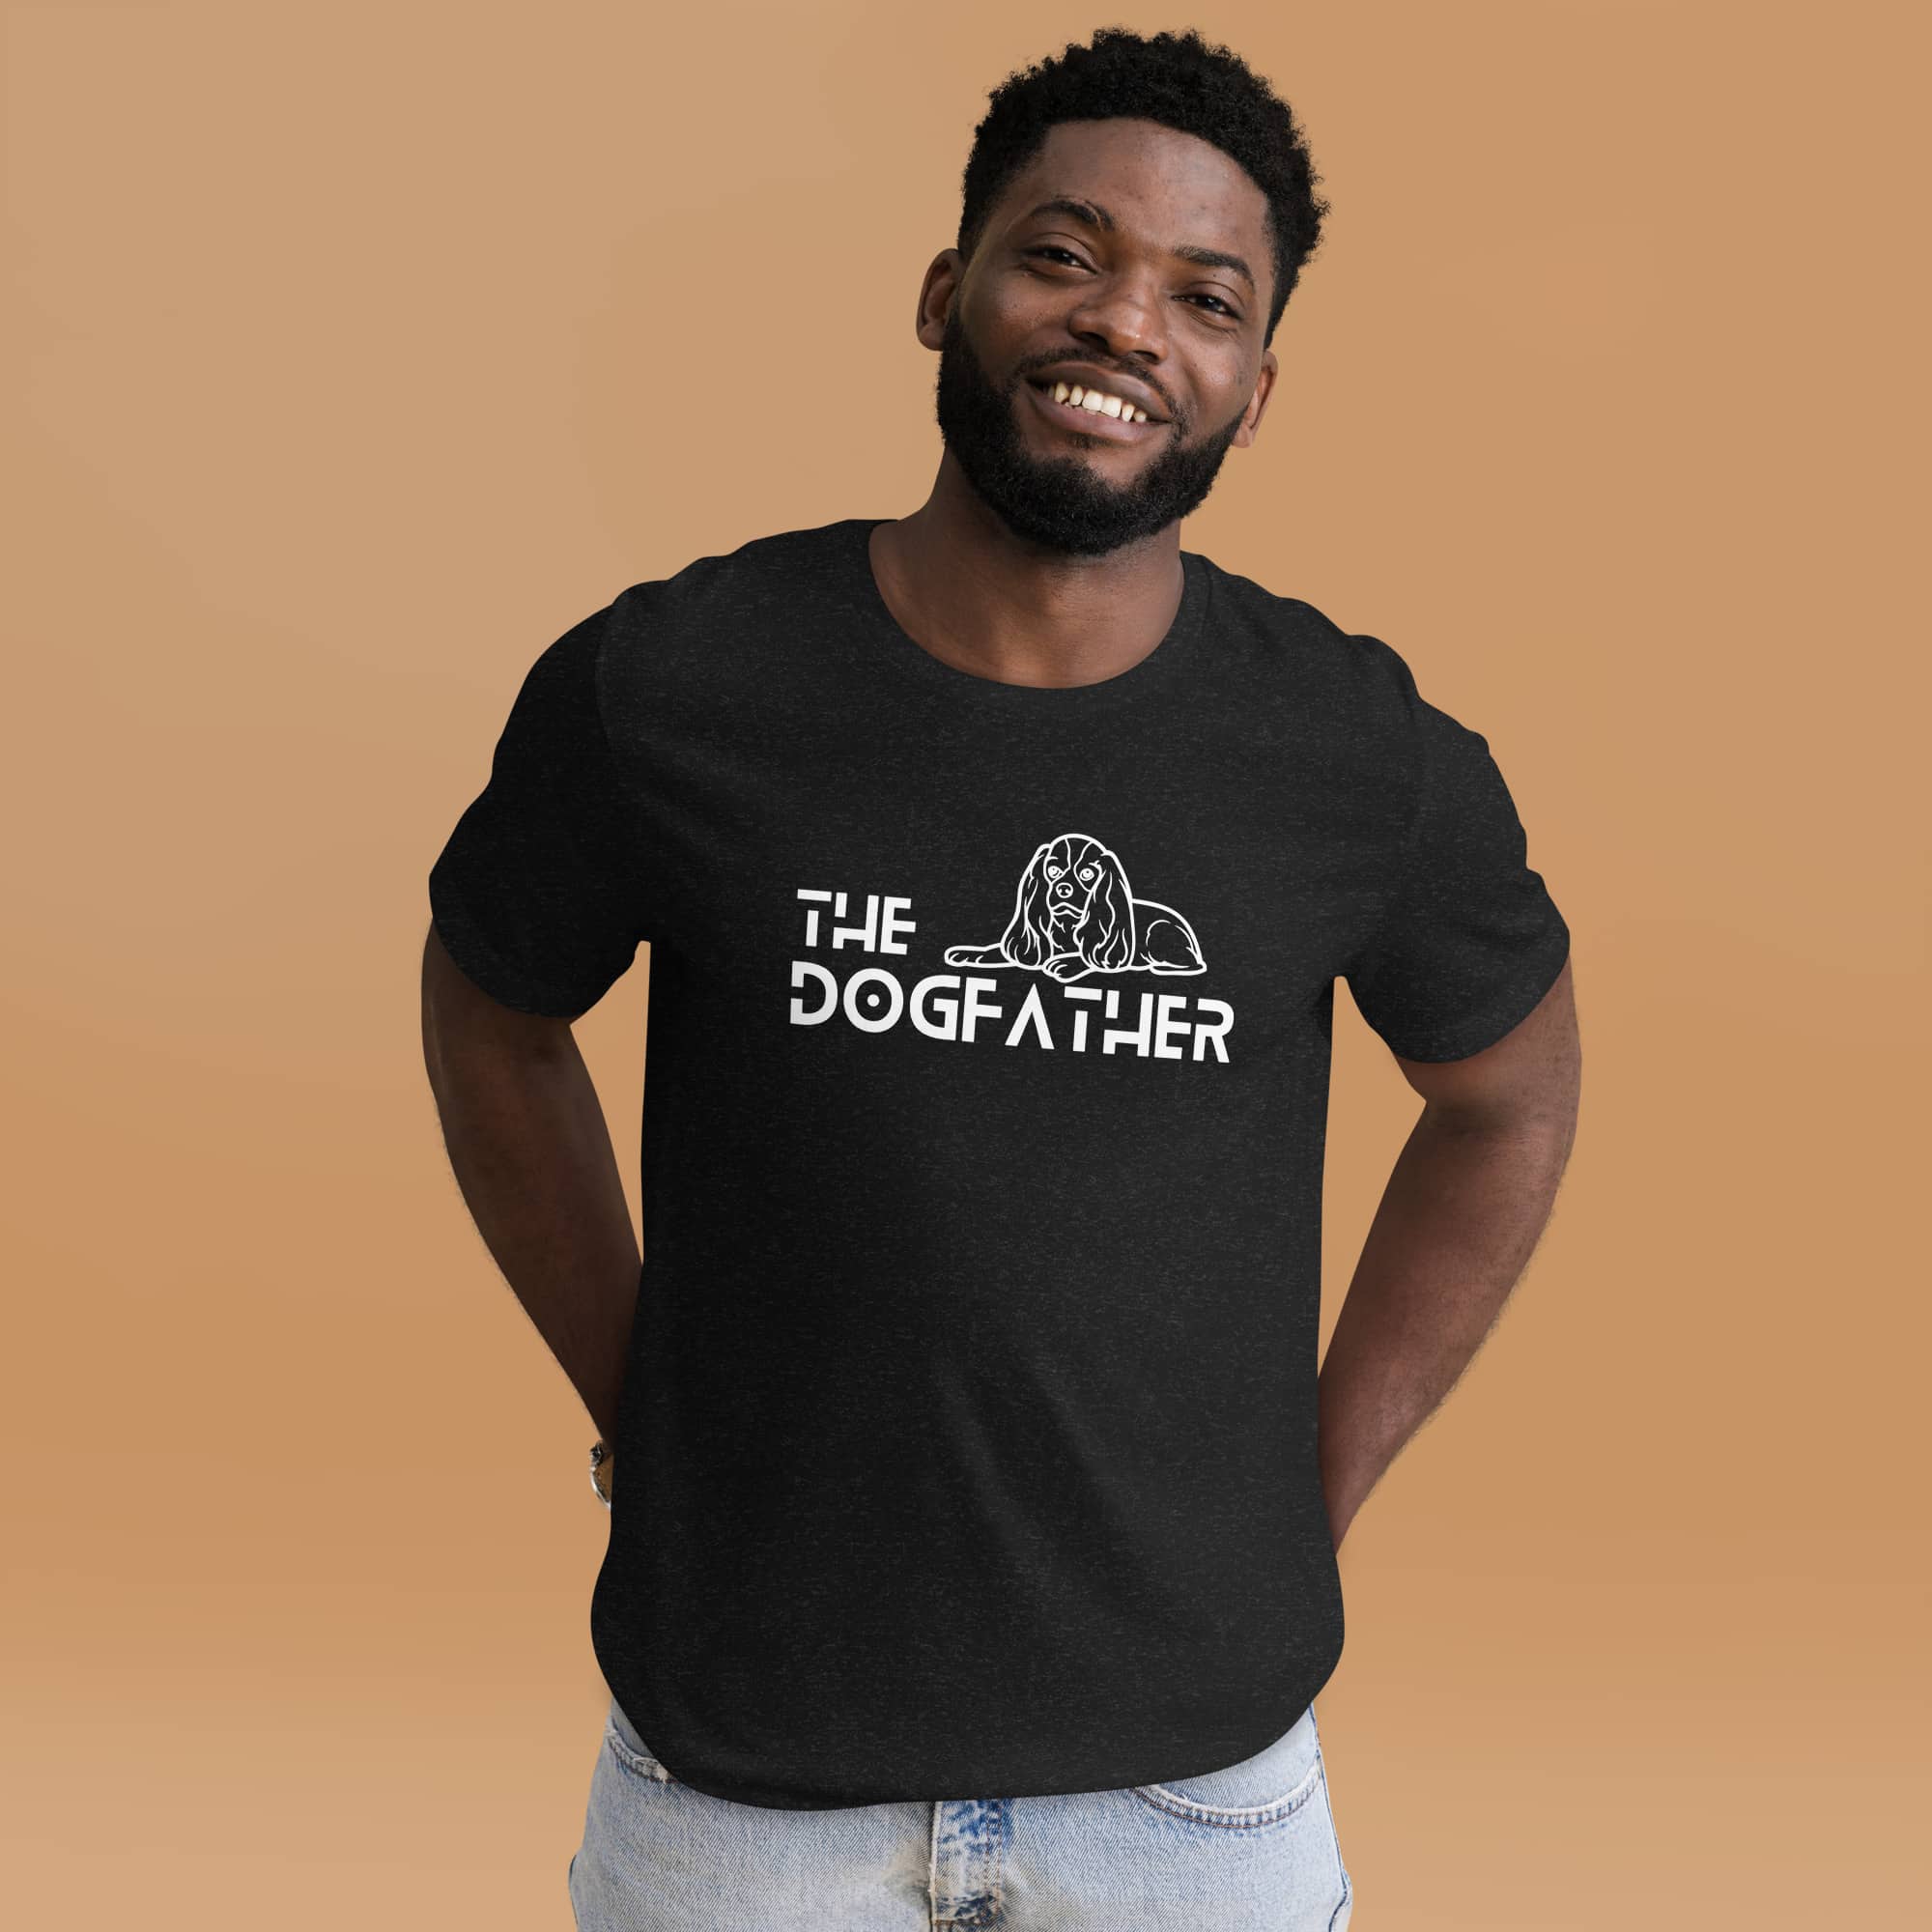 The Dogfather Hounds Unisex T-Shirt. Black Heather. Male